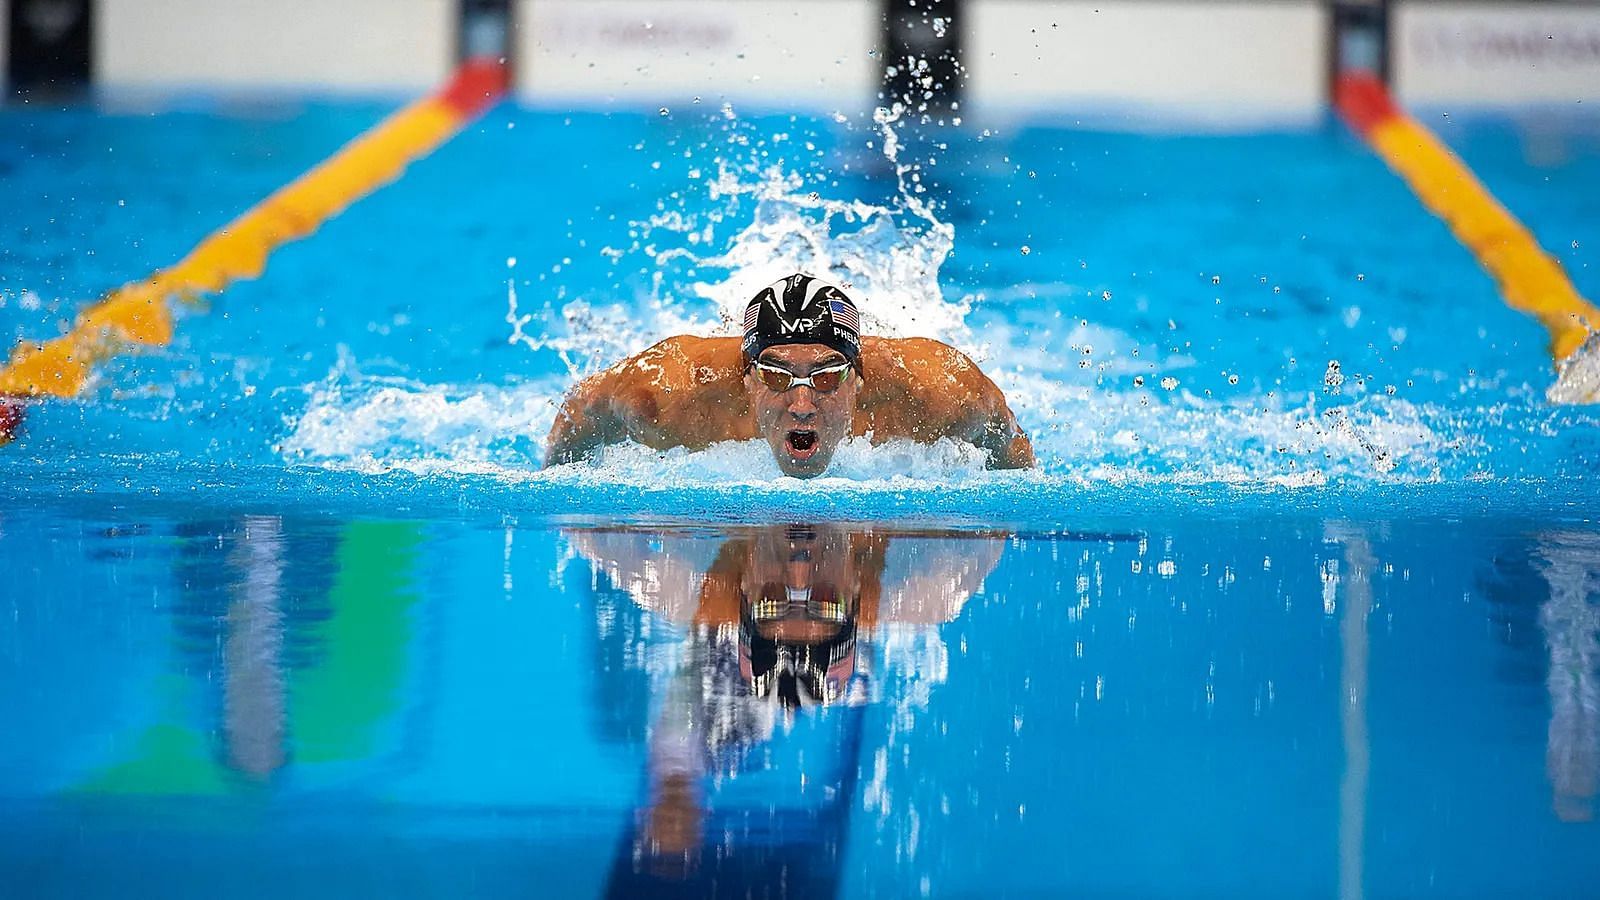 Michael Phelps is the most decorated Olympian of all-time